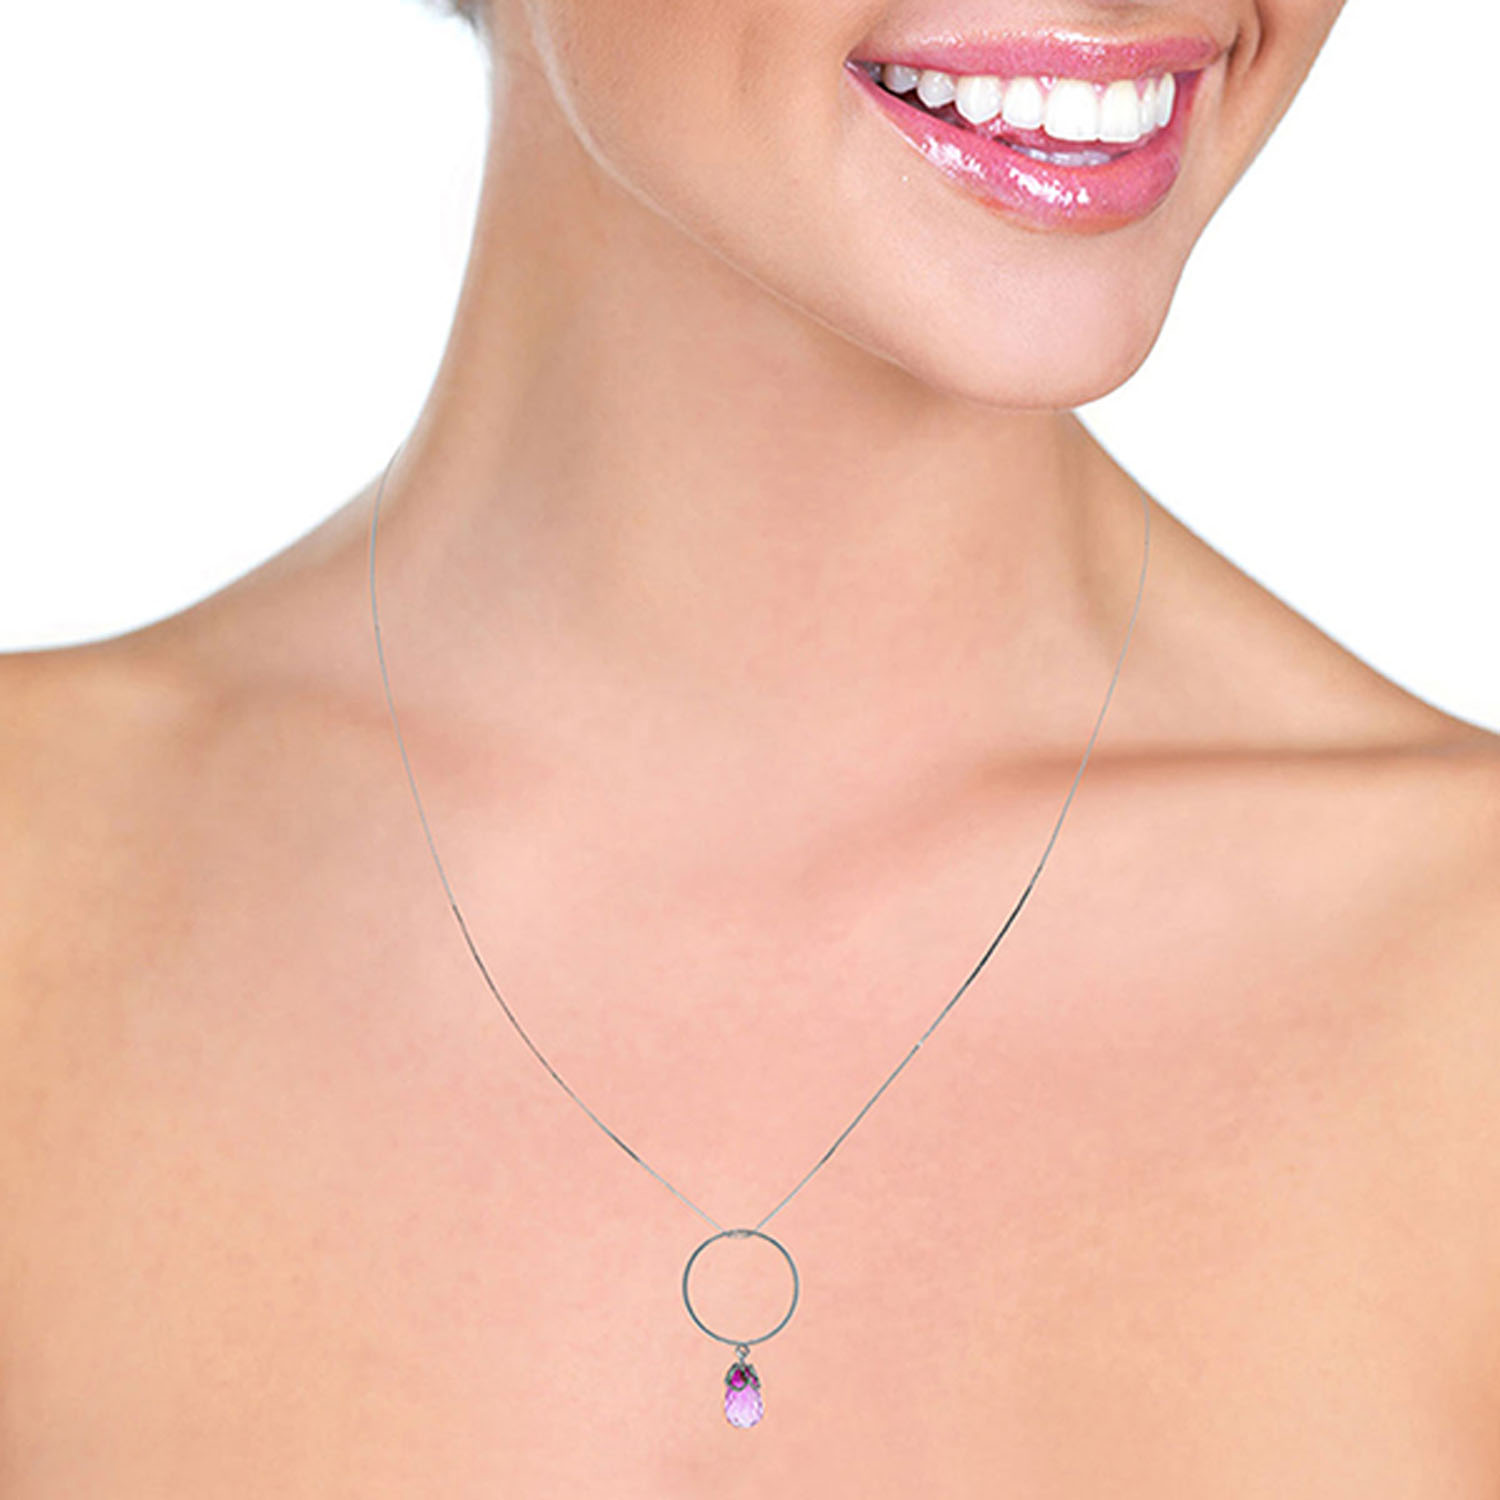 Galaxy Gold 3 Carat 14k 16" Solid White Gold Necklace with Natural Pink Topaz Charm Circle Pendant - image 2 of 2